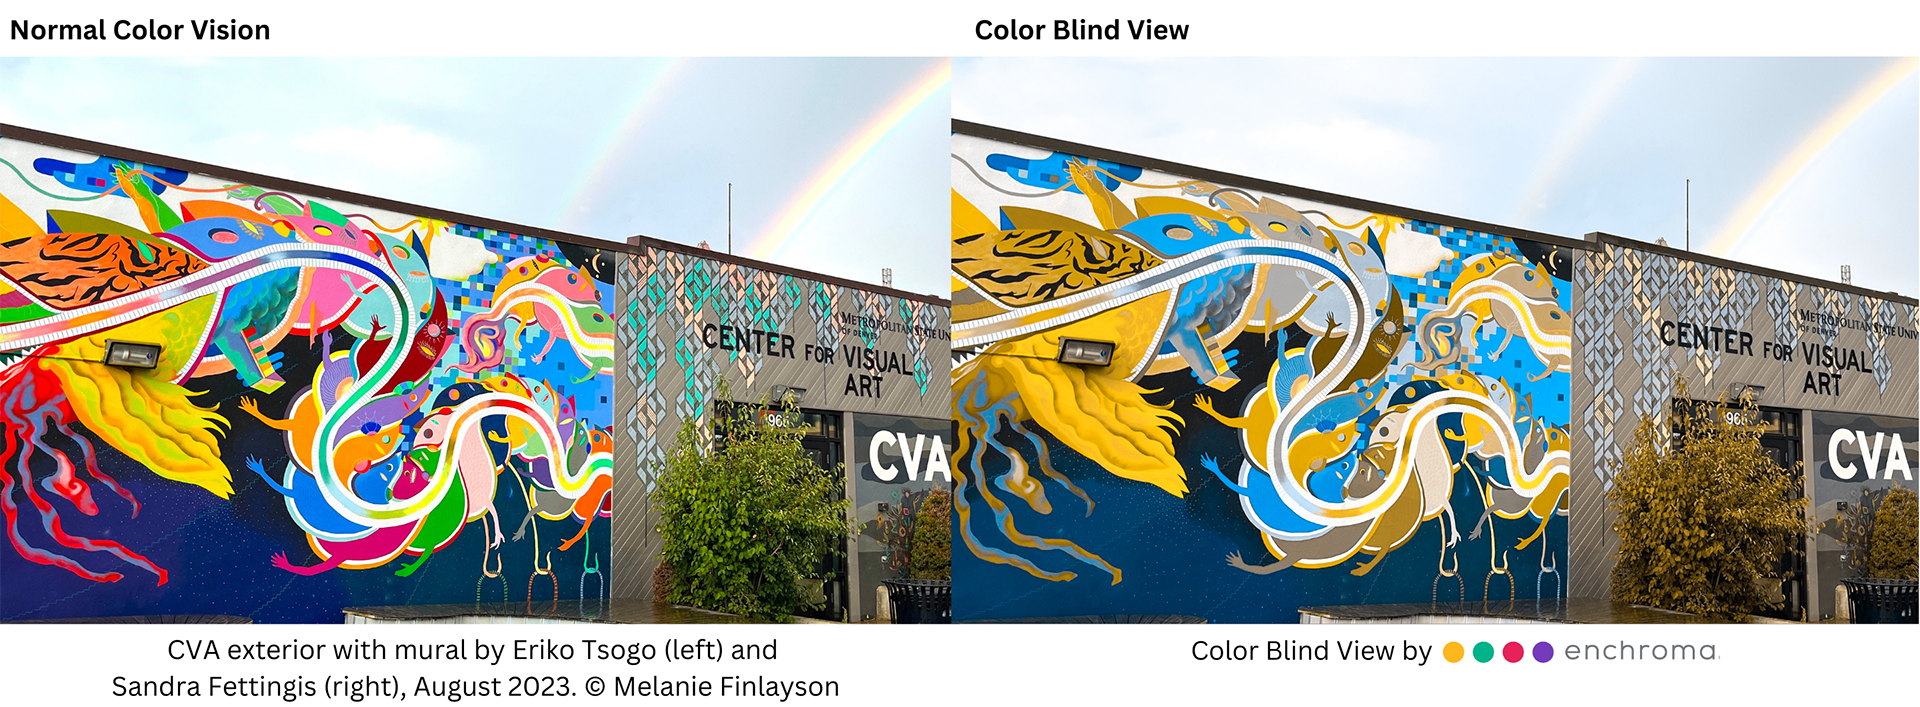 A normal color vision and color blind view of the CVA exterior with mural